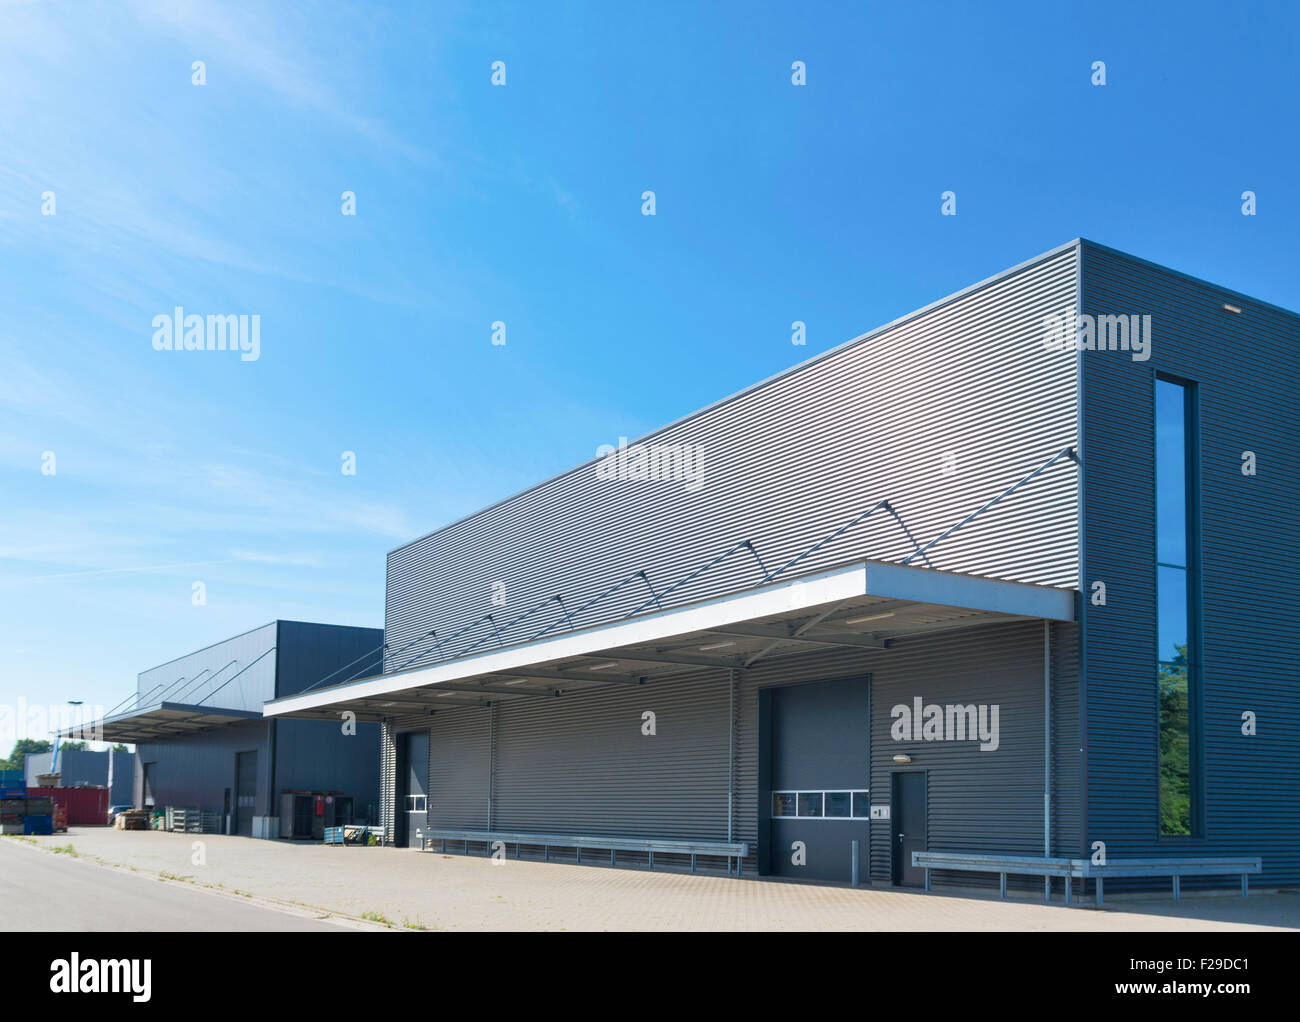 exterior of a modern warehouse building against a blue sky Stock Photo